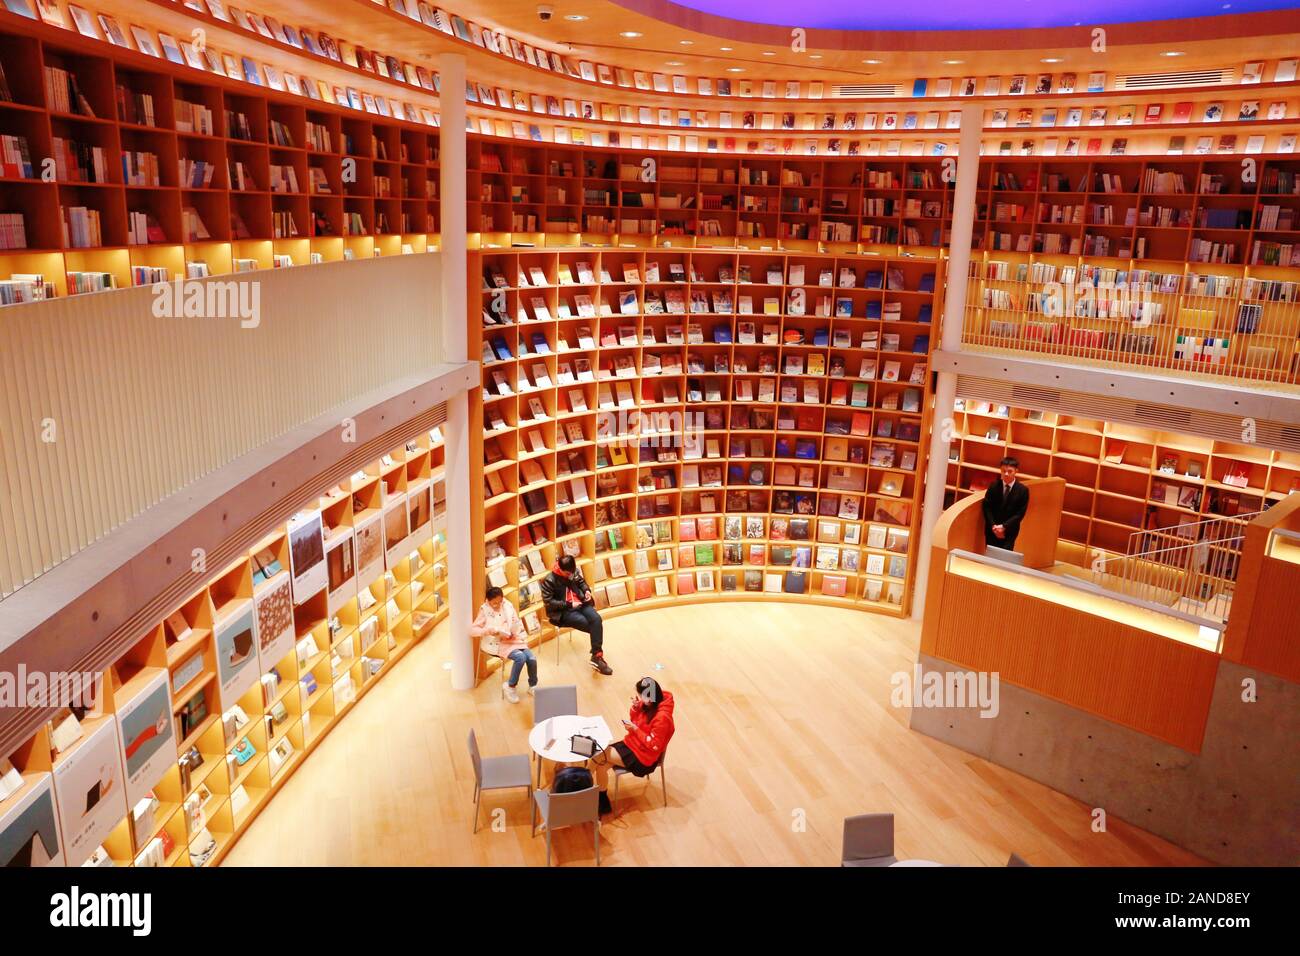 An inside view of citizens reading and strolling in the praised most beautiful Xinhua Bookstore designed by Japanese self-taught architect in Minhang Stock Photo